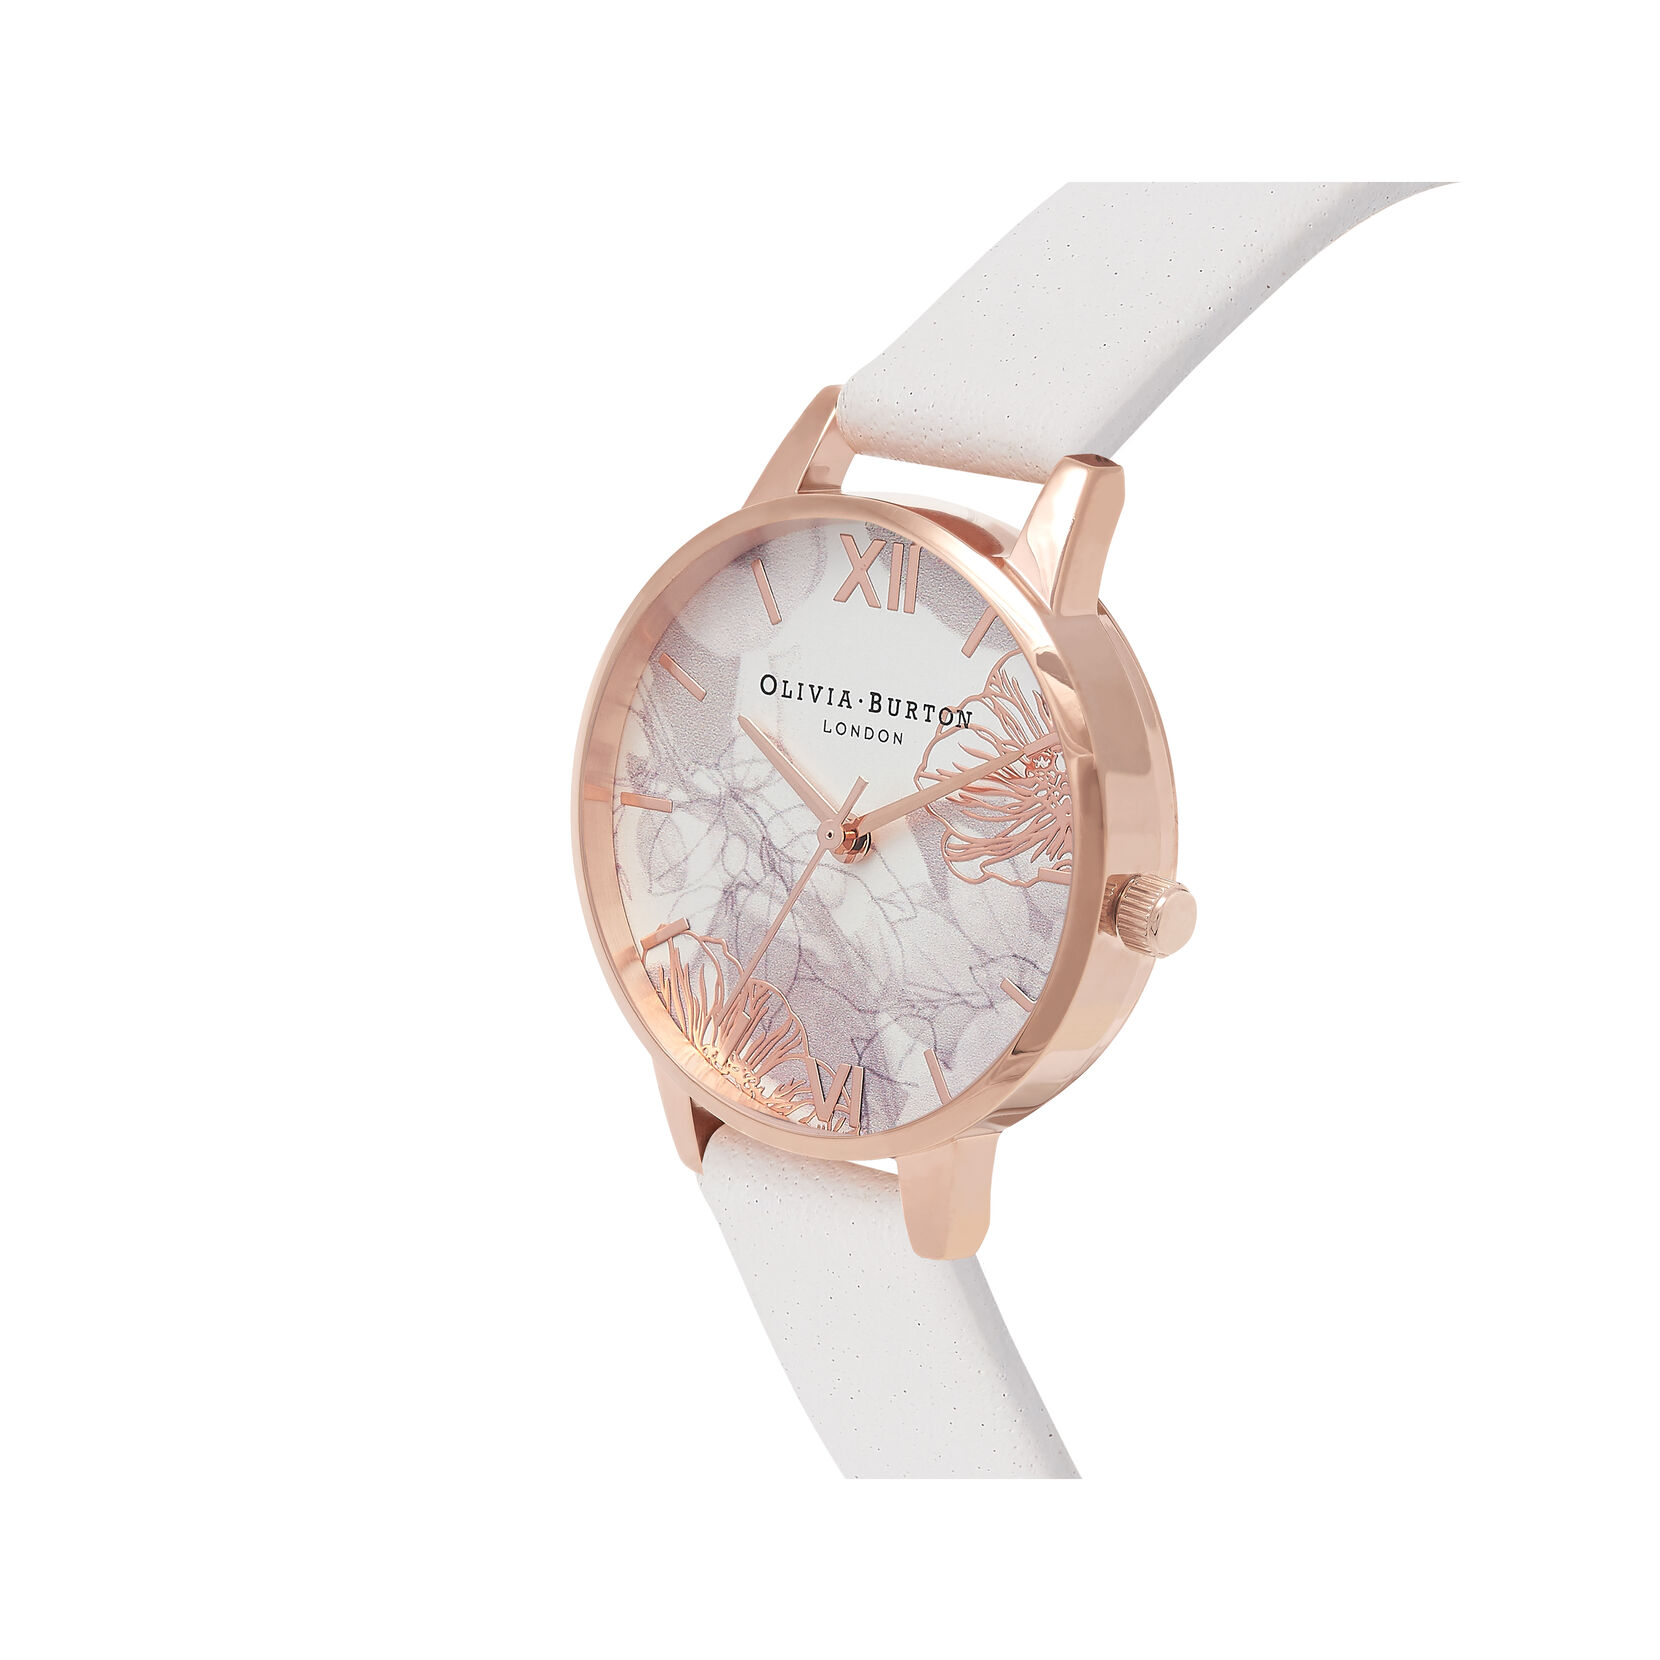 30mm Rose Gold & Blush Leather Strap Watch